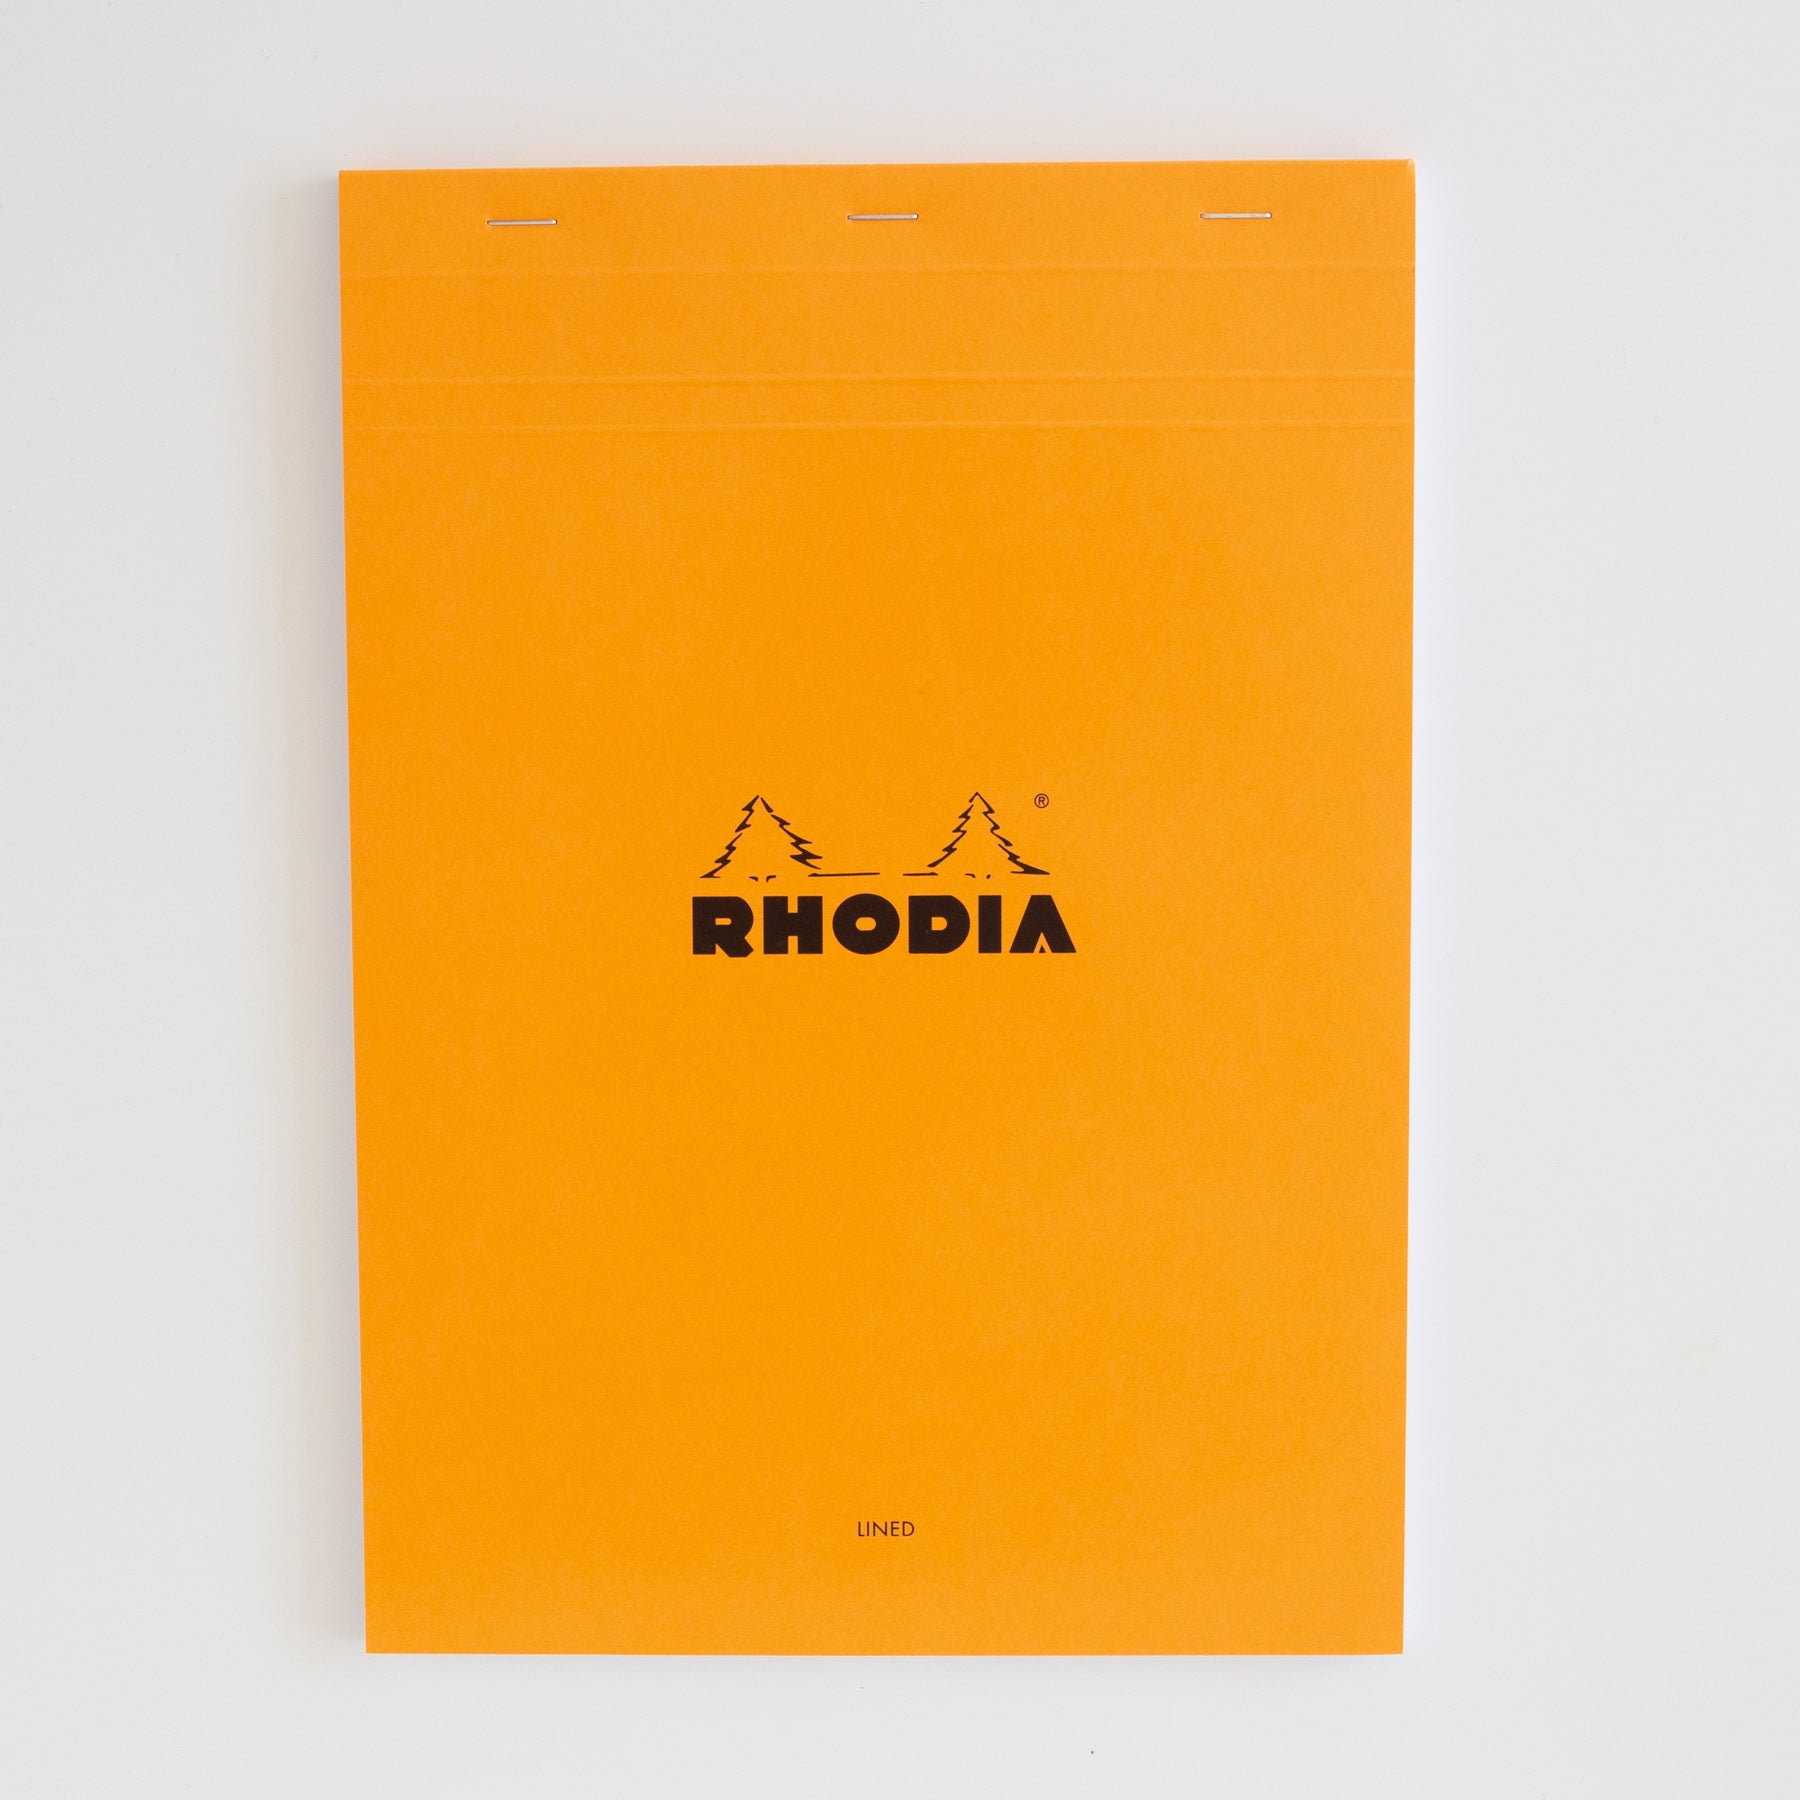 Rhodia A4 Lined